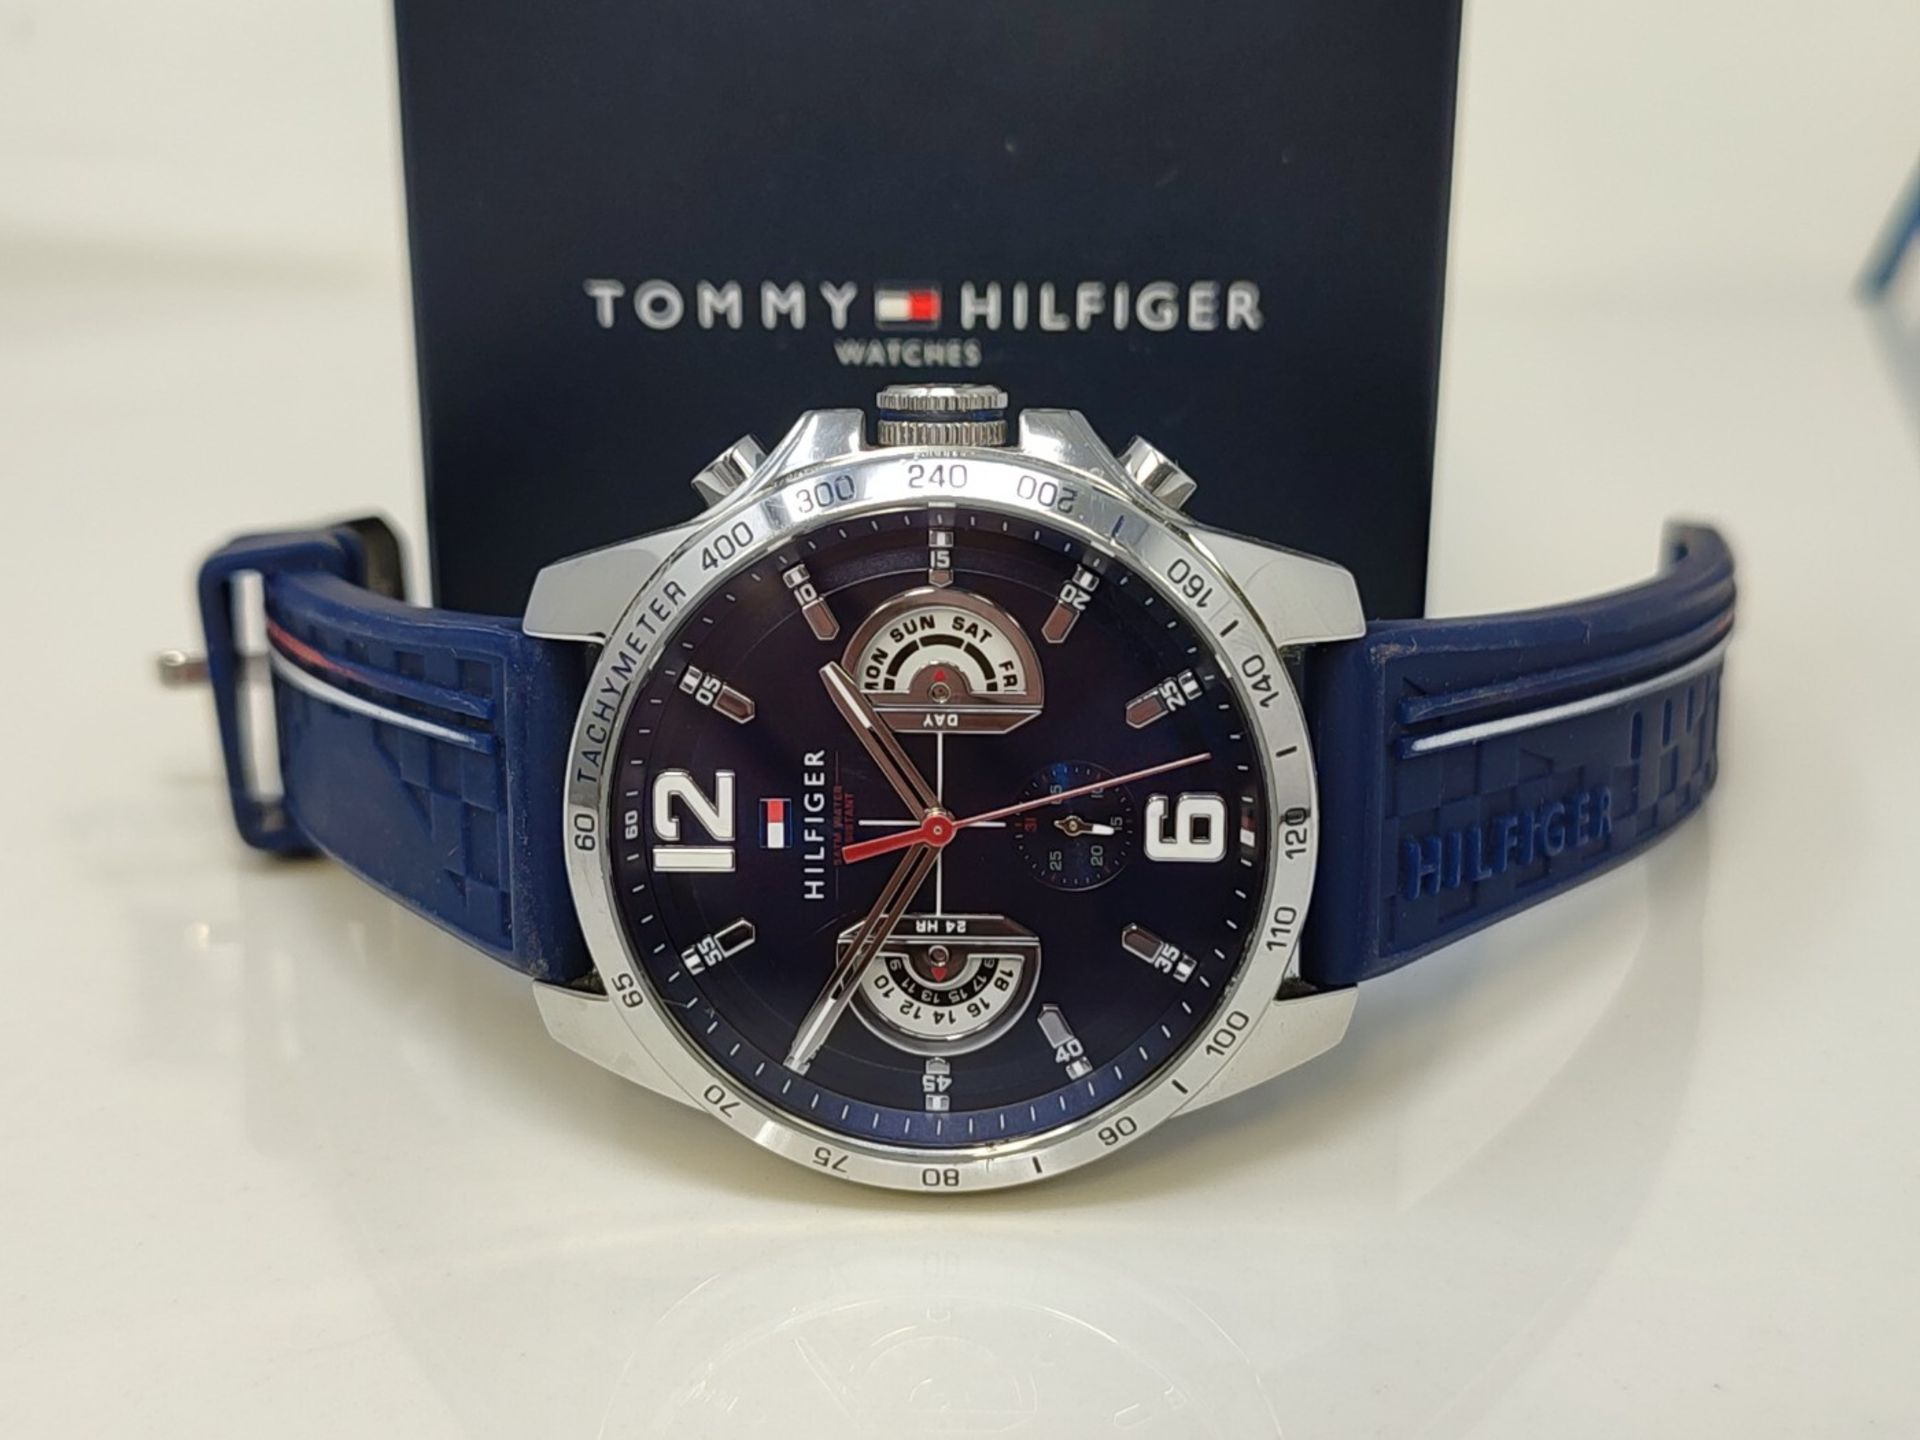 RRP £116.00 Tommy Hilfiger Multi Dial Quartz Watch for Men with Navy Blue Silicone Strap - 1791476 - Image 2 of 3